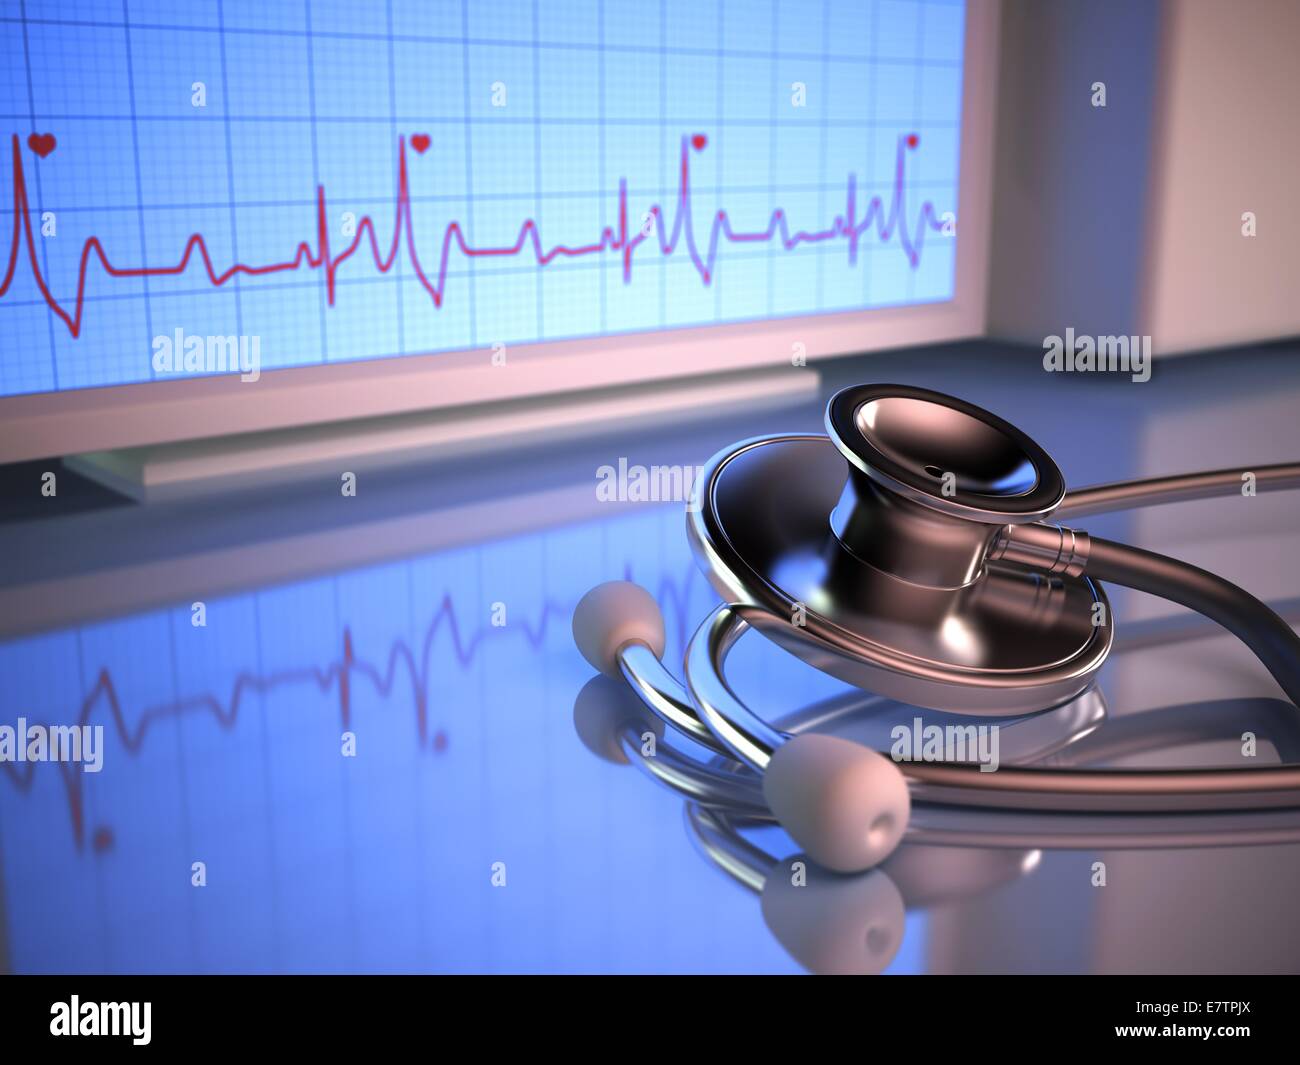 Stethoscope and cardiograph, computer artwork. Stock Photo